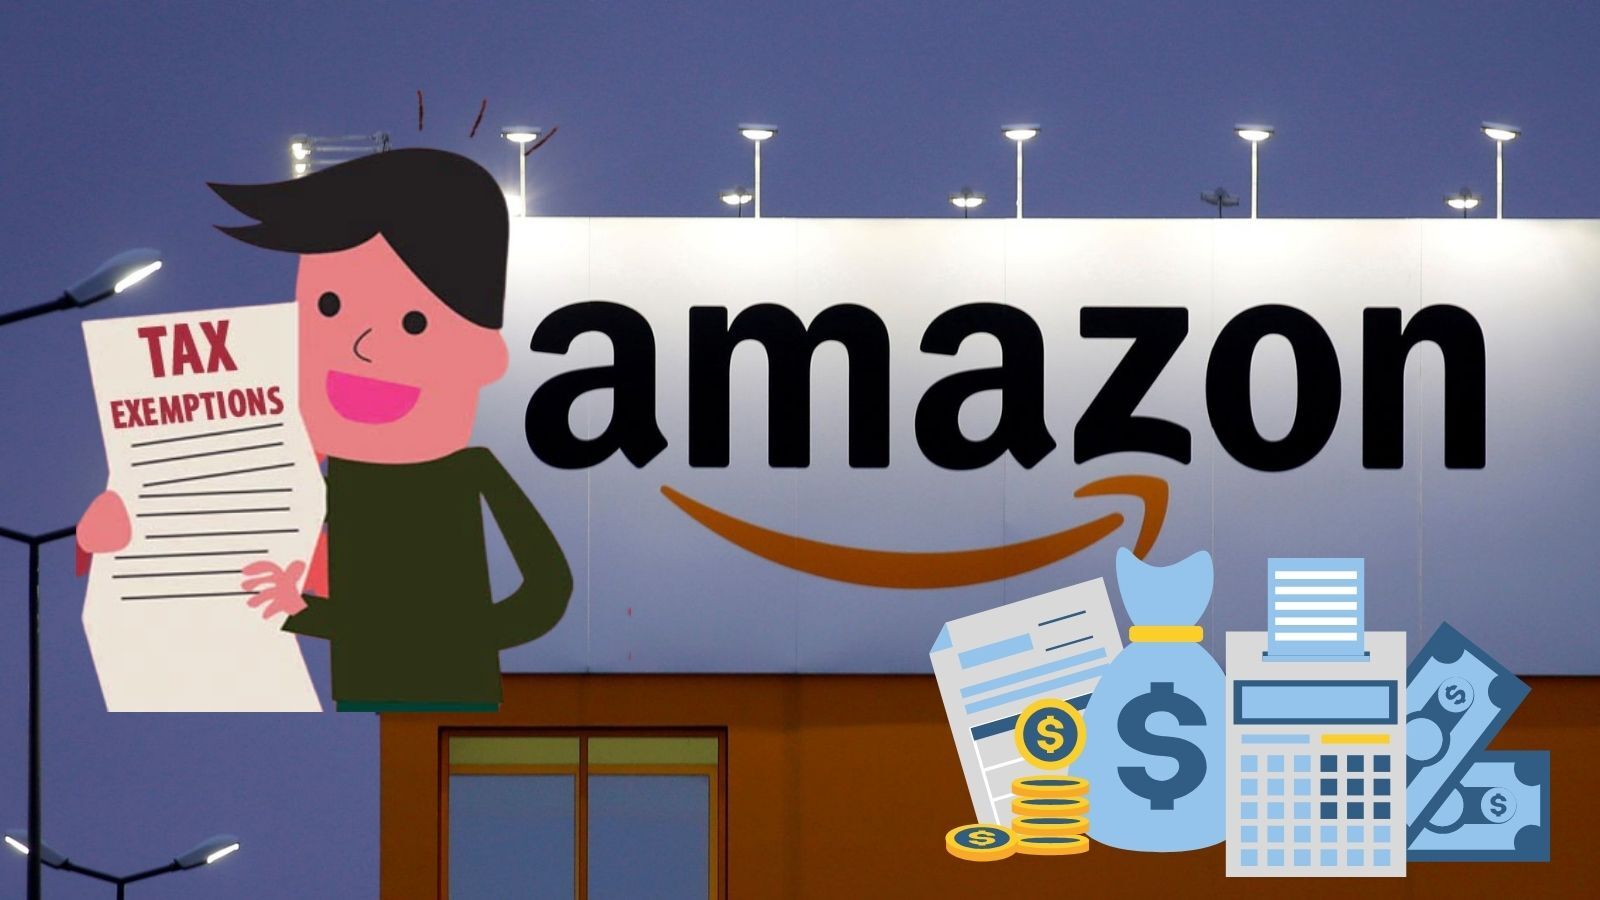 Amazon Tax Exemption Program (All You Need to Know) Cherry Picks